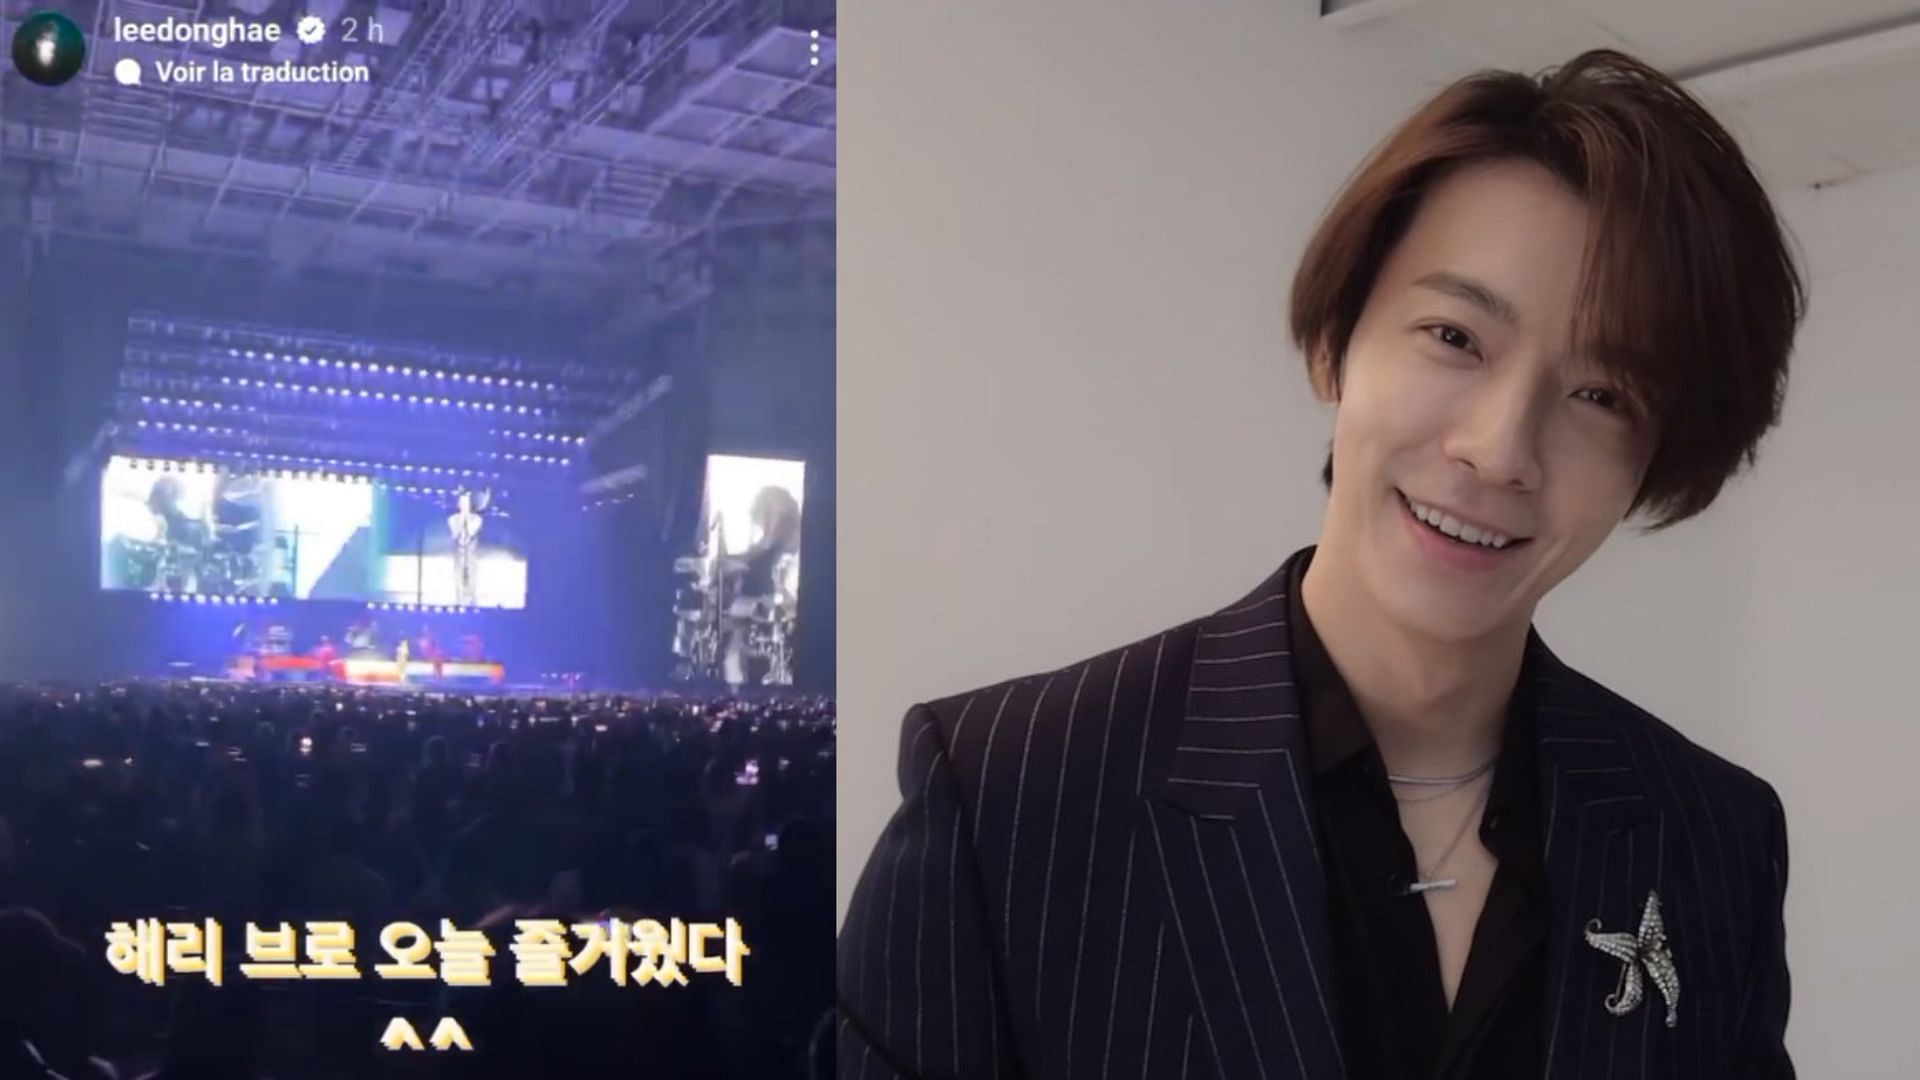 Veteran K-pop idol Donghae from Super Junior was also present at Harry Styles&#039; concert, posting a story saying that he enjoyed himself. (Images via Instagram/ @leedonghae and Twitter/ @_kimiganaitara)